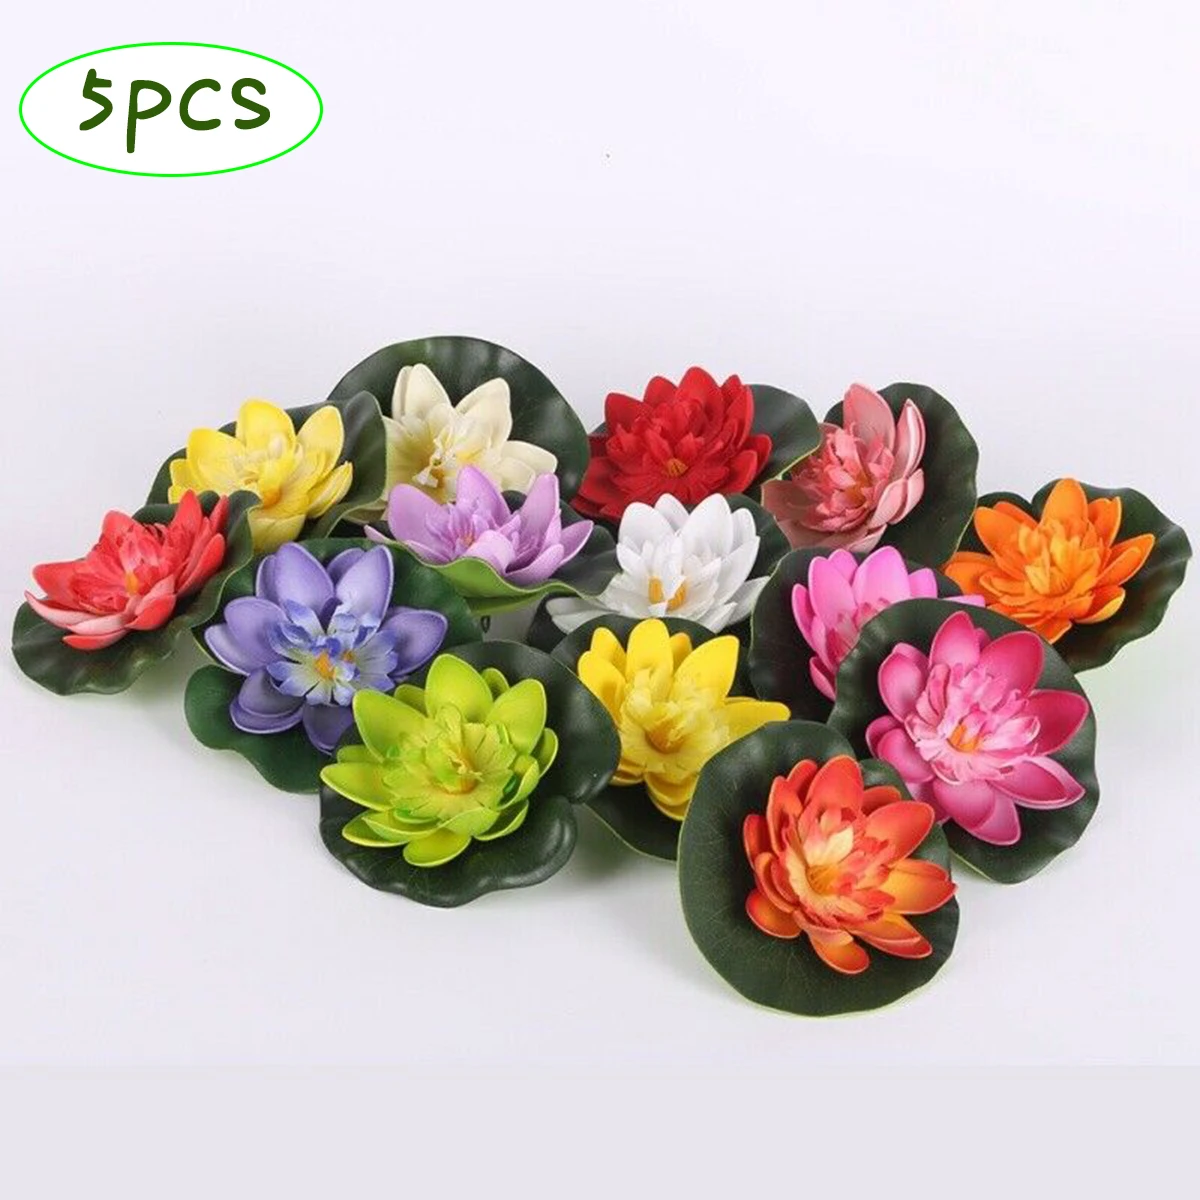 

5pcs Floating Artificial Lotus Fake Plant DIY Water Lily Pond Plants Simulation Lotus Home Outdoor Garden Pool Decor Supplies